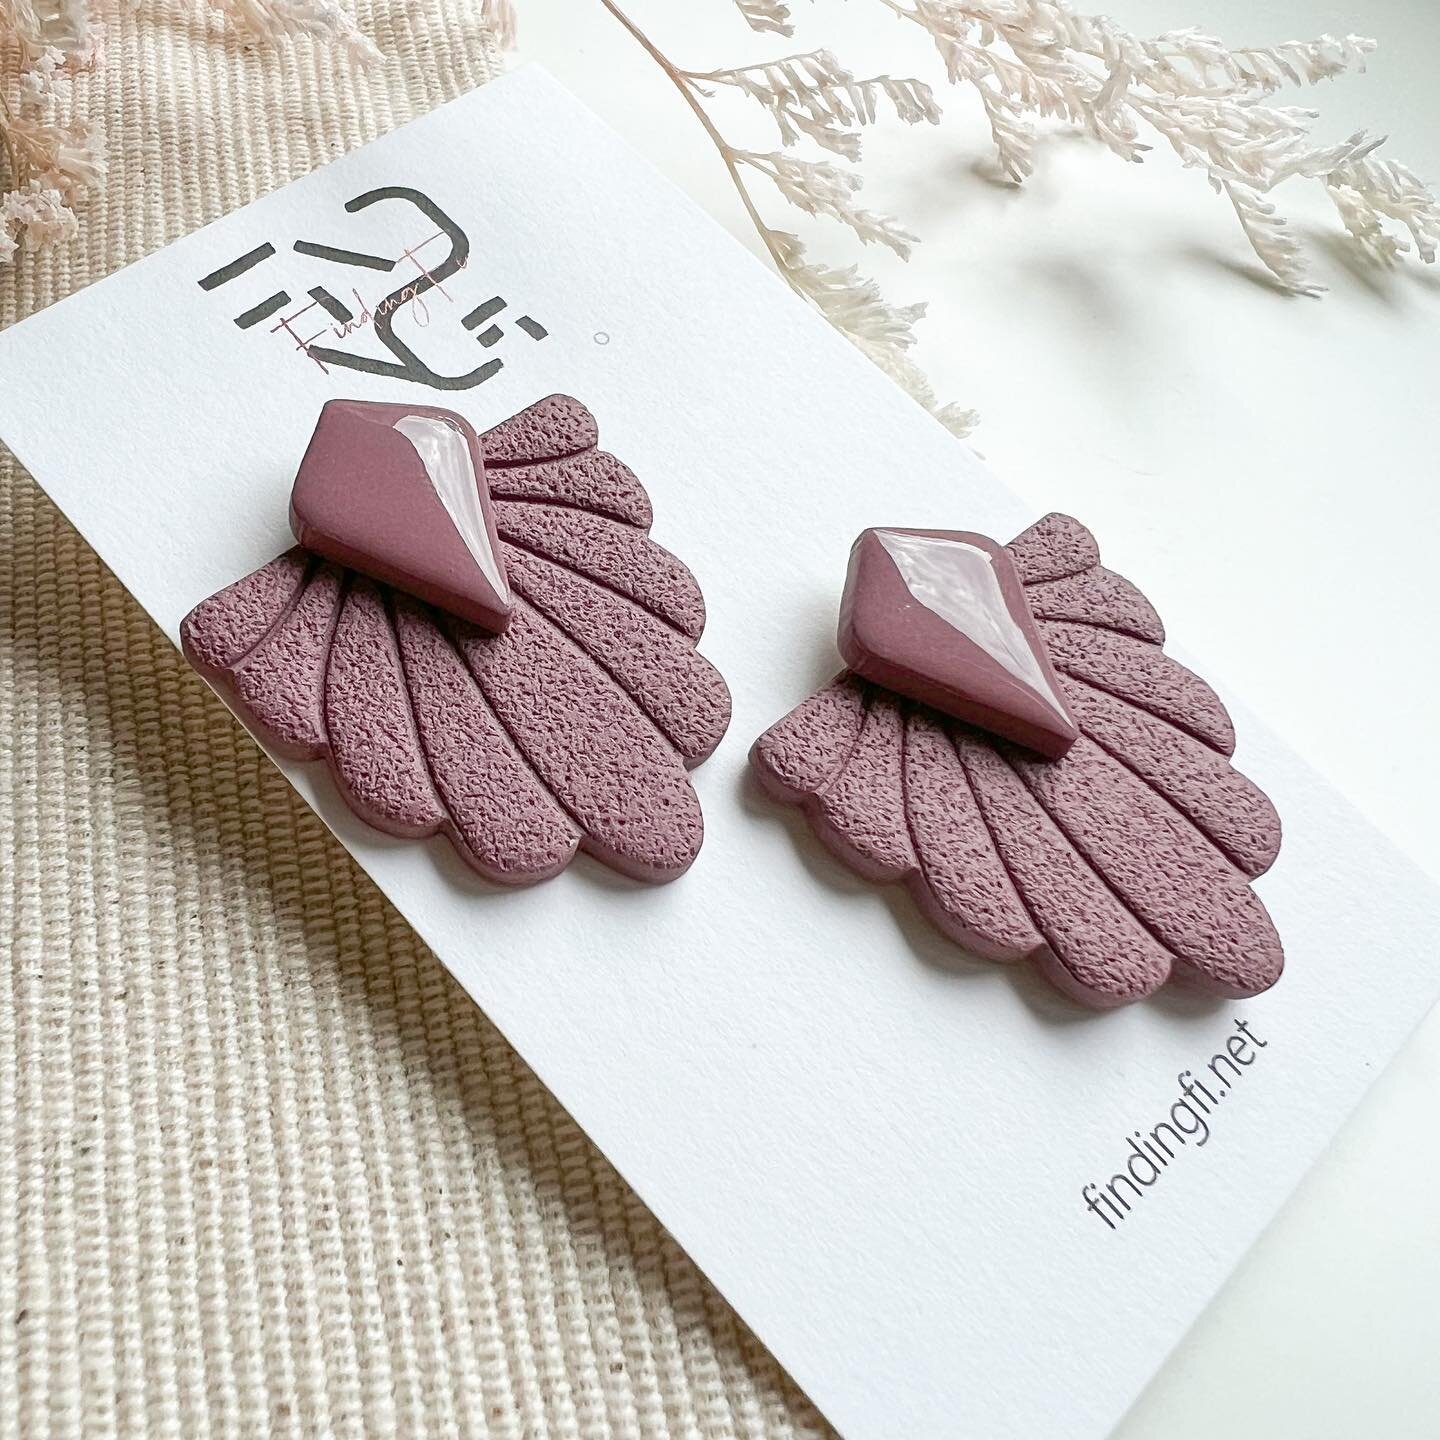 The Josephine collection
In maroon, latte, forest and slate
~available via bio link~
.
.
#polymerclayearrings #polymerclay #polymerclayjewelry #earrings #clayearrings #handmadeearrings #earringstyle #earringcollection #earringsoftheday
#artdecoearrin